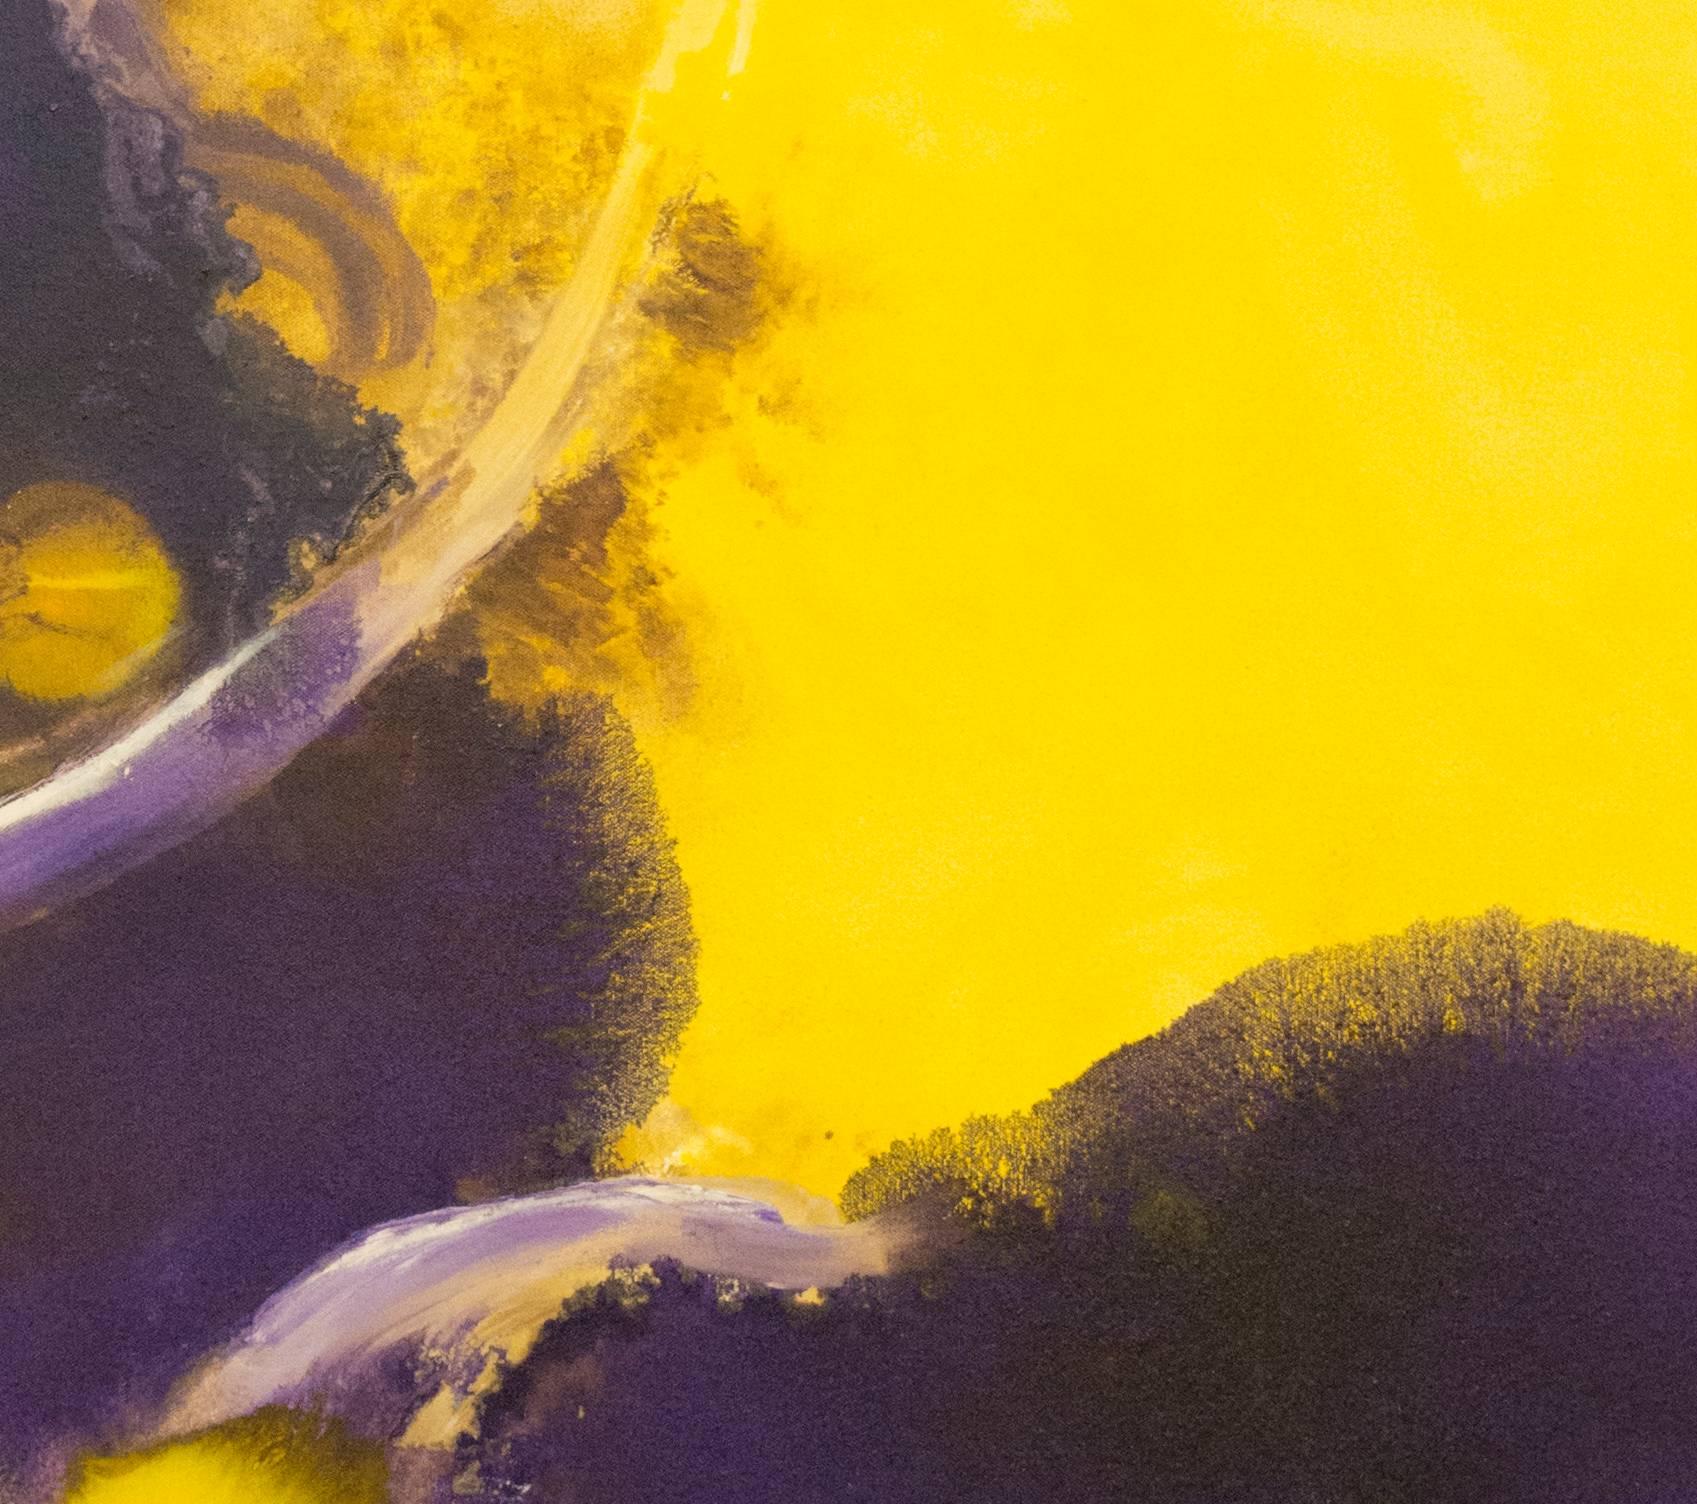 Flood of Purple & Yellow - Painting by Aleta Pippin